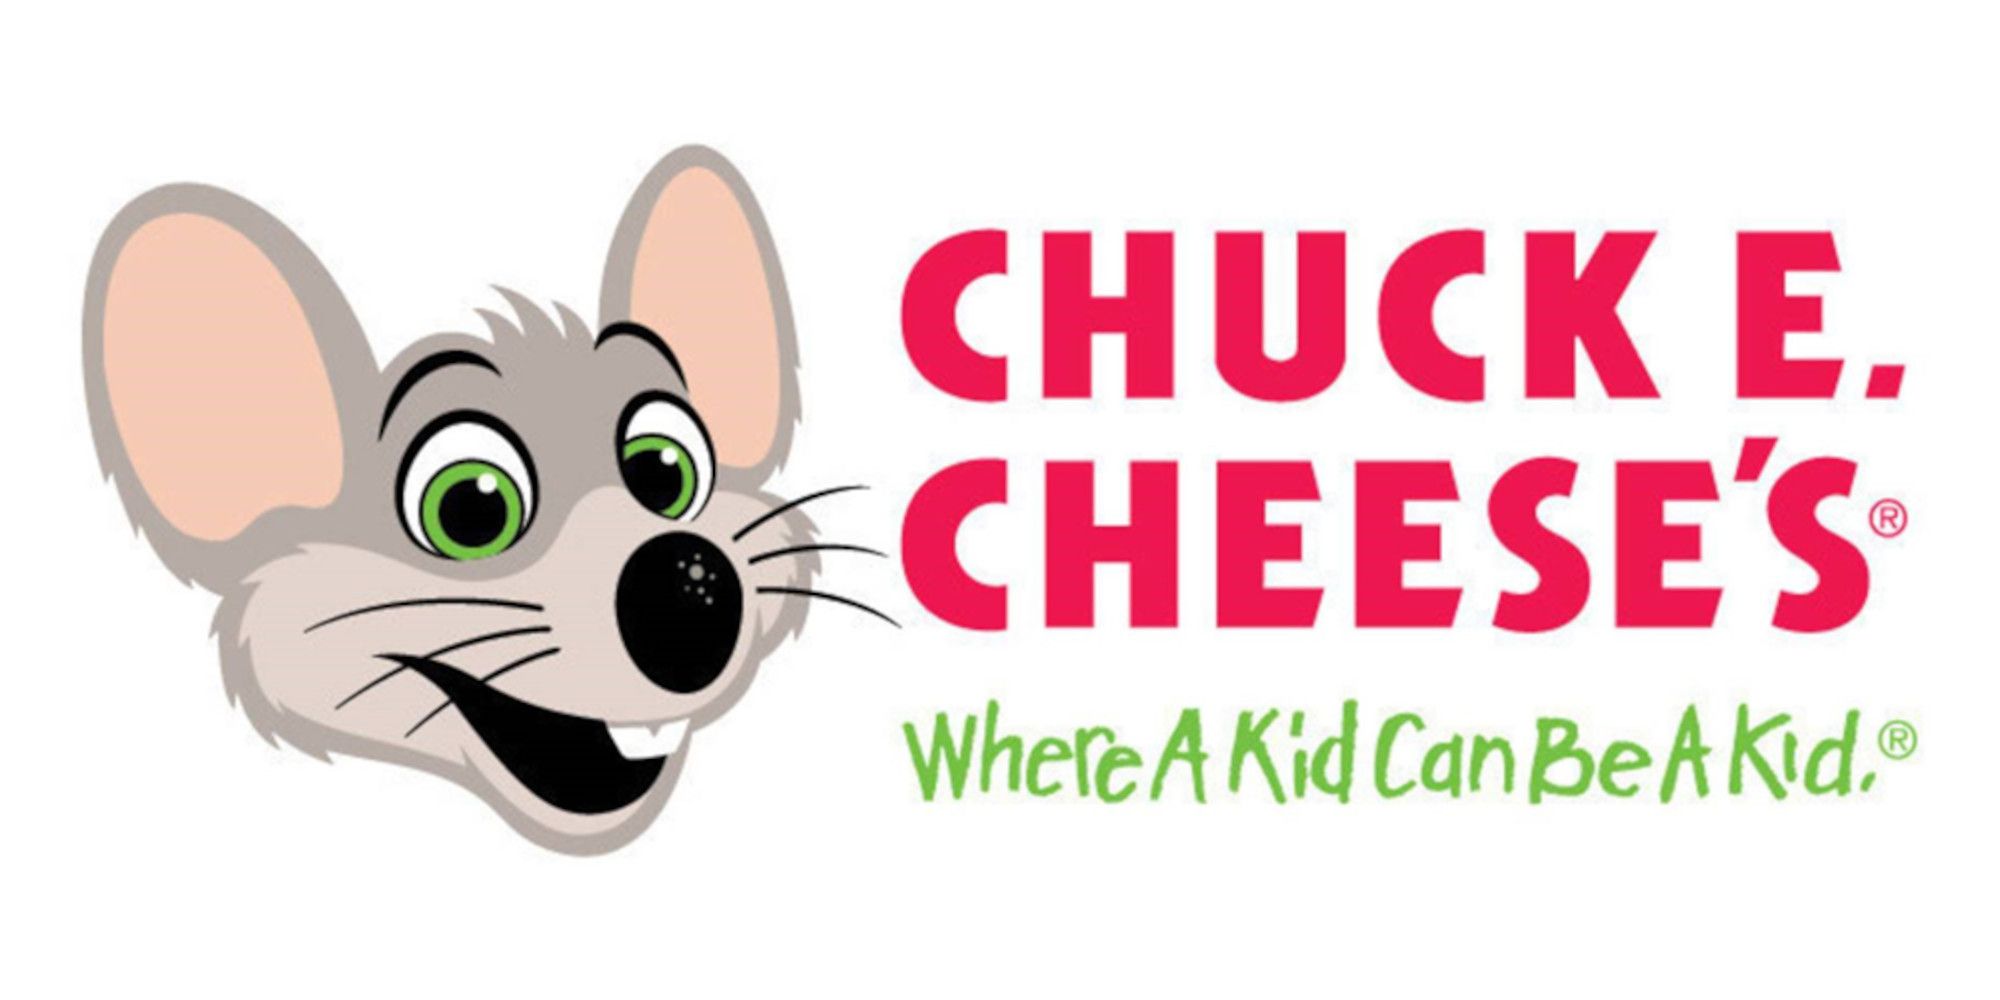 Chuck E Cheese Is Bankrupt But Plans Animated Series And Live Action Film